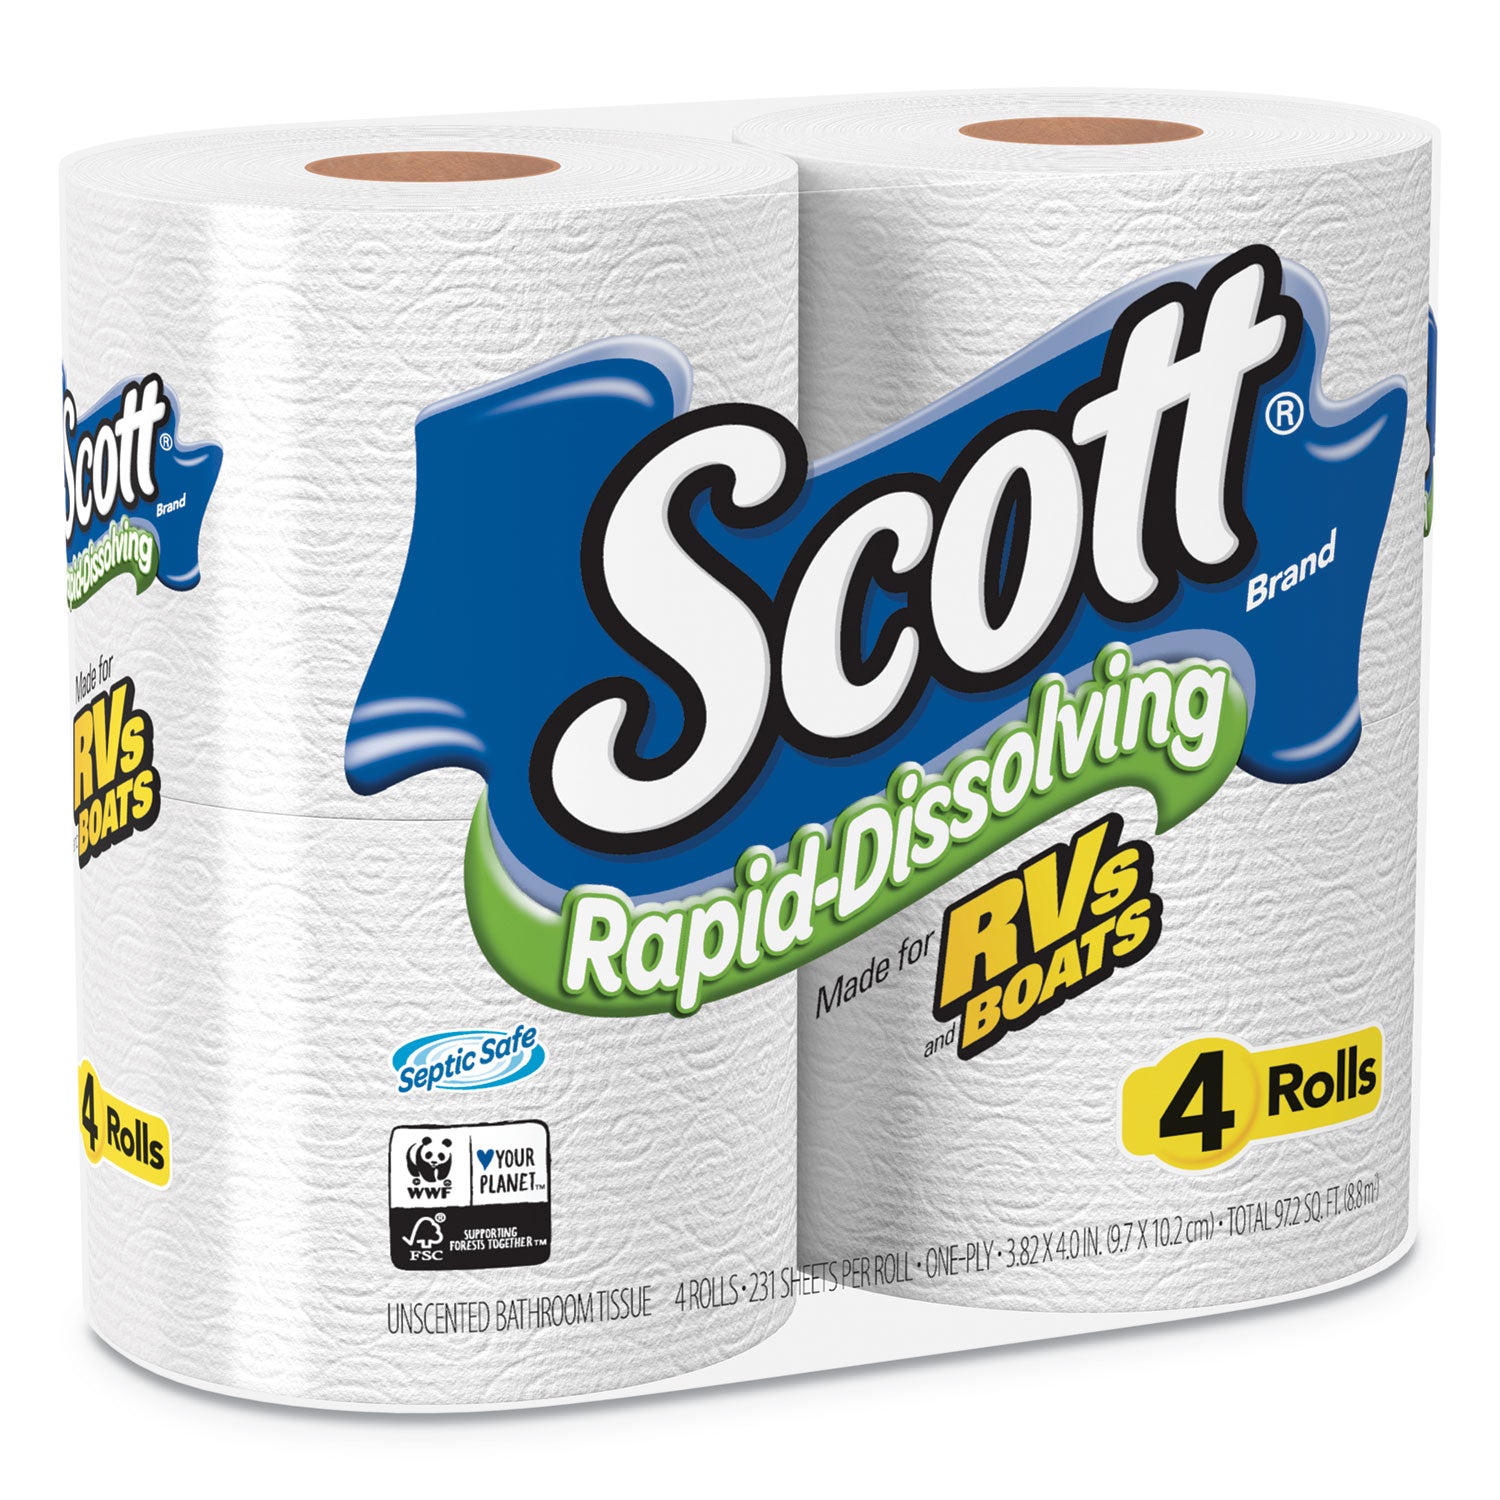 rapid-dissolving-toilet-paper-bath-tissue-septic-safe-1-ply-white-231-sheets-roll-4-rolls-pack-12-packs-carton_kcc47617 - 2